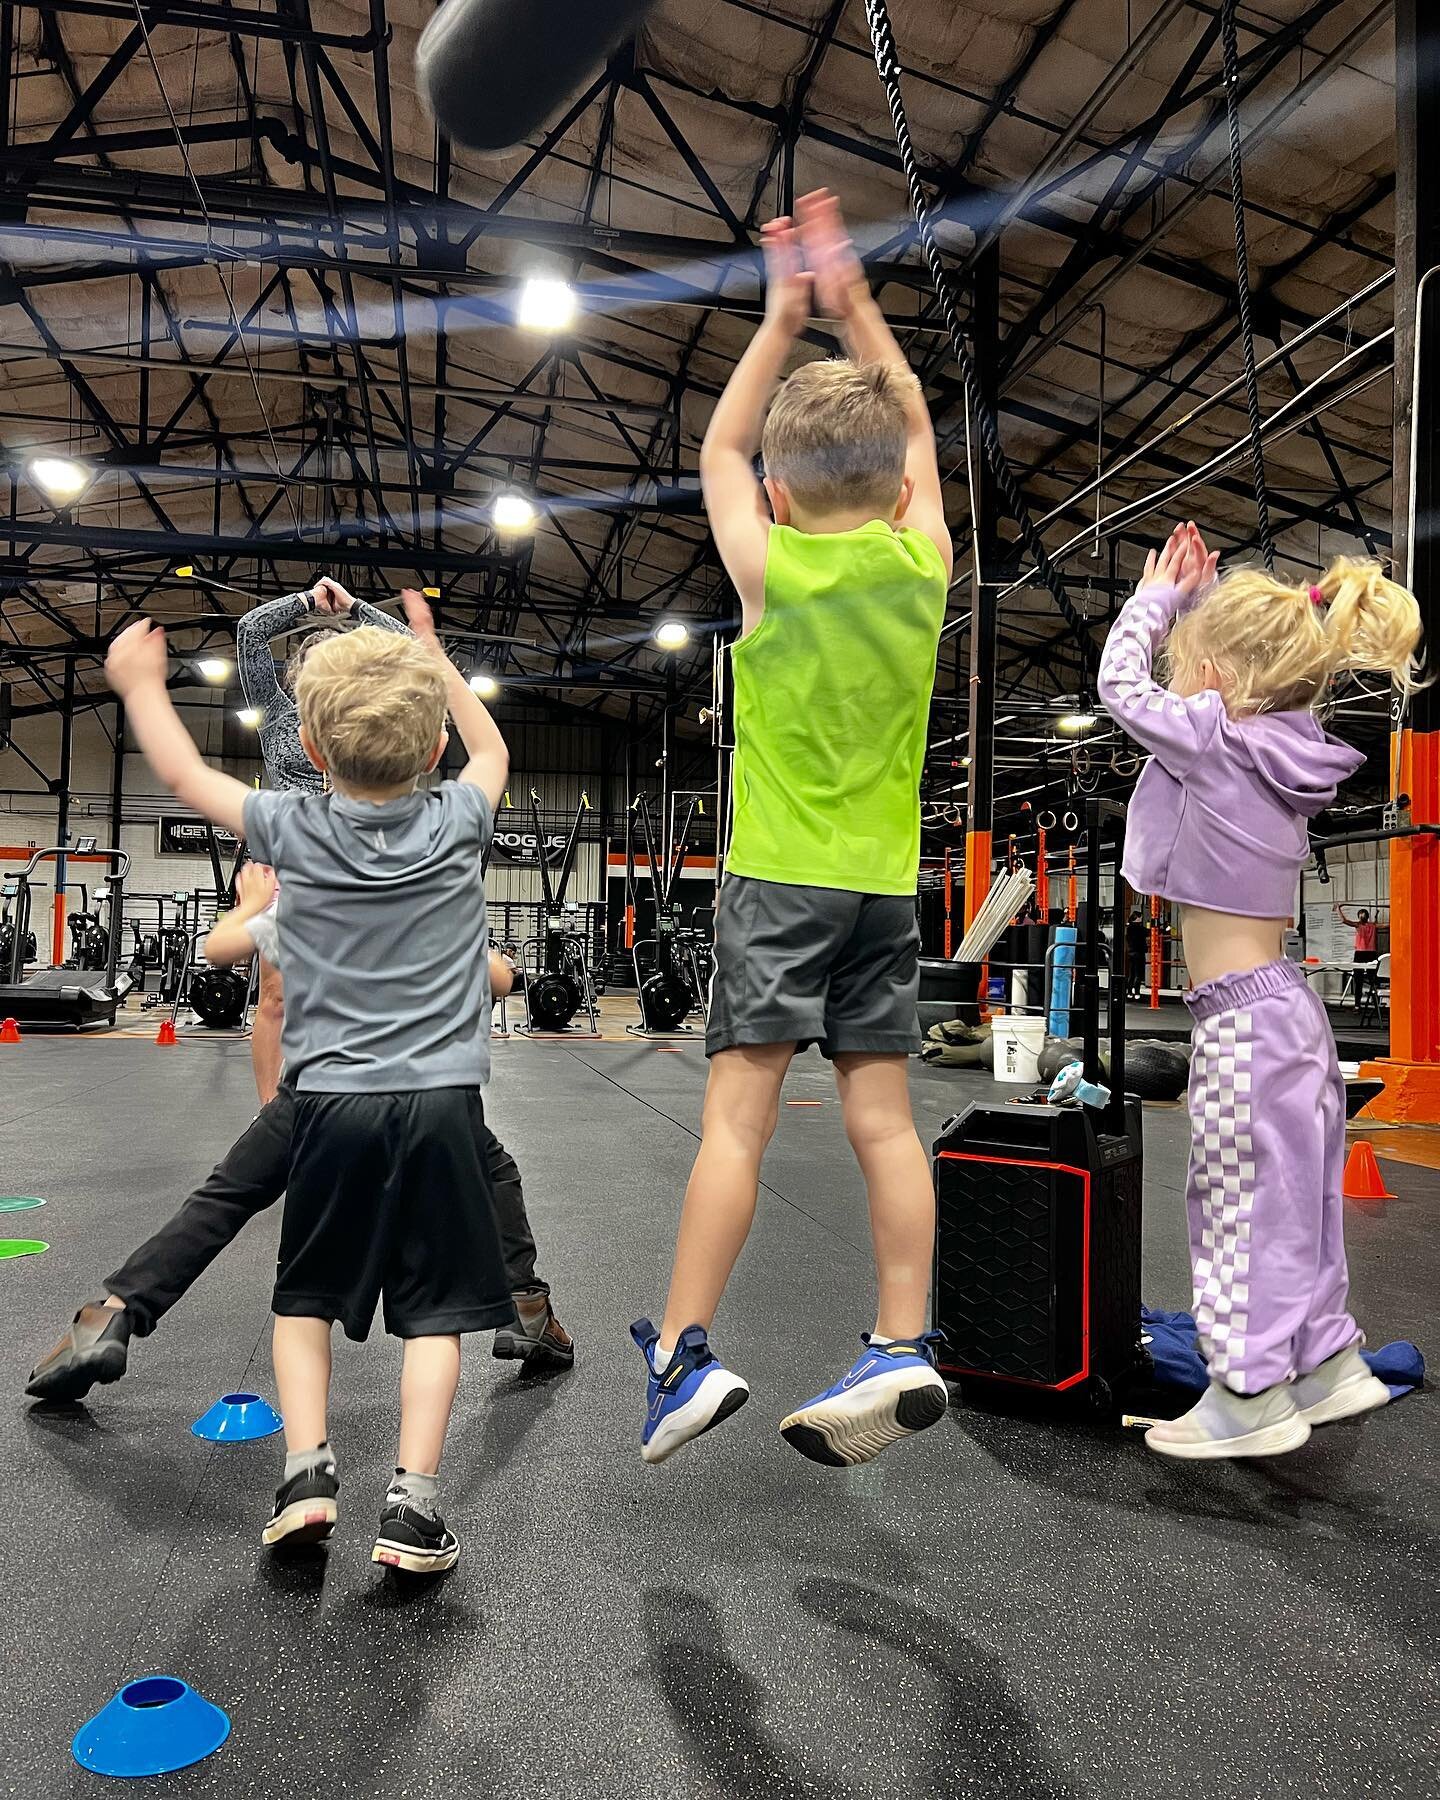 We love our #rtcfkids 💚

CF Kids - 3-5 Preschool: 10:00 M/W/F. Parents- if you are taking the 10 AM CrossFit Class, your kids will do their class then go into child care while your class finishes.

CF Kids - Elementary (approx 6-11): M/F - 3:30-4:30